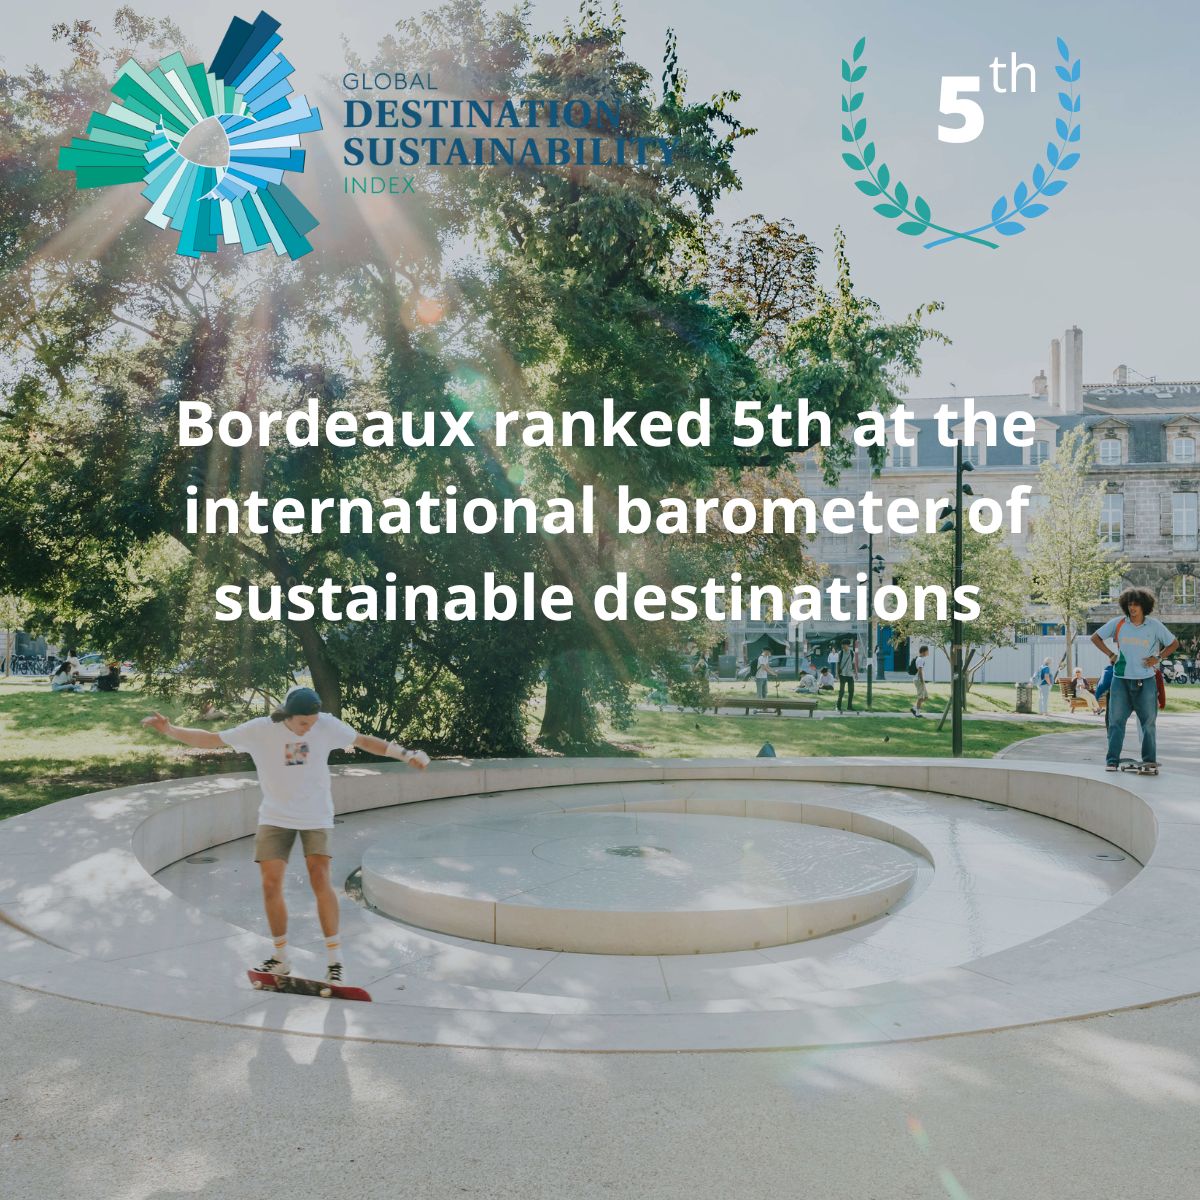 Bordeaux rises to 5th place in the world ranking of responsible destinations.